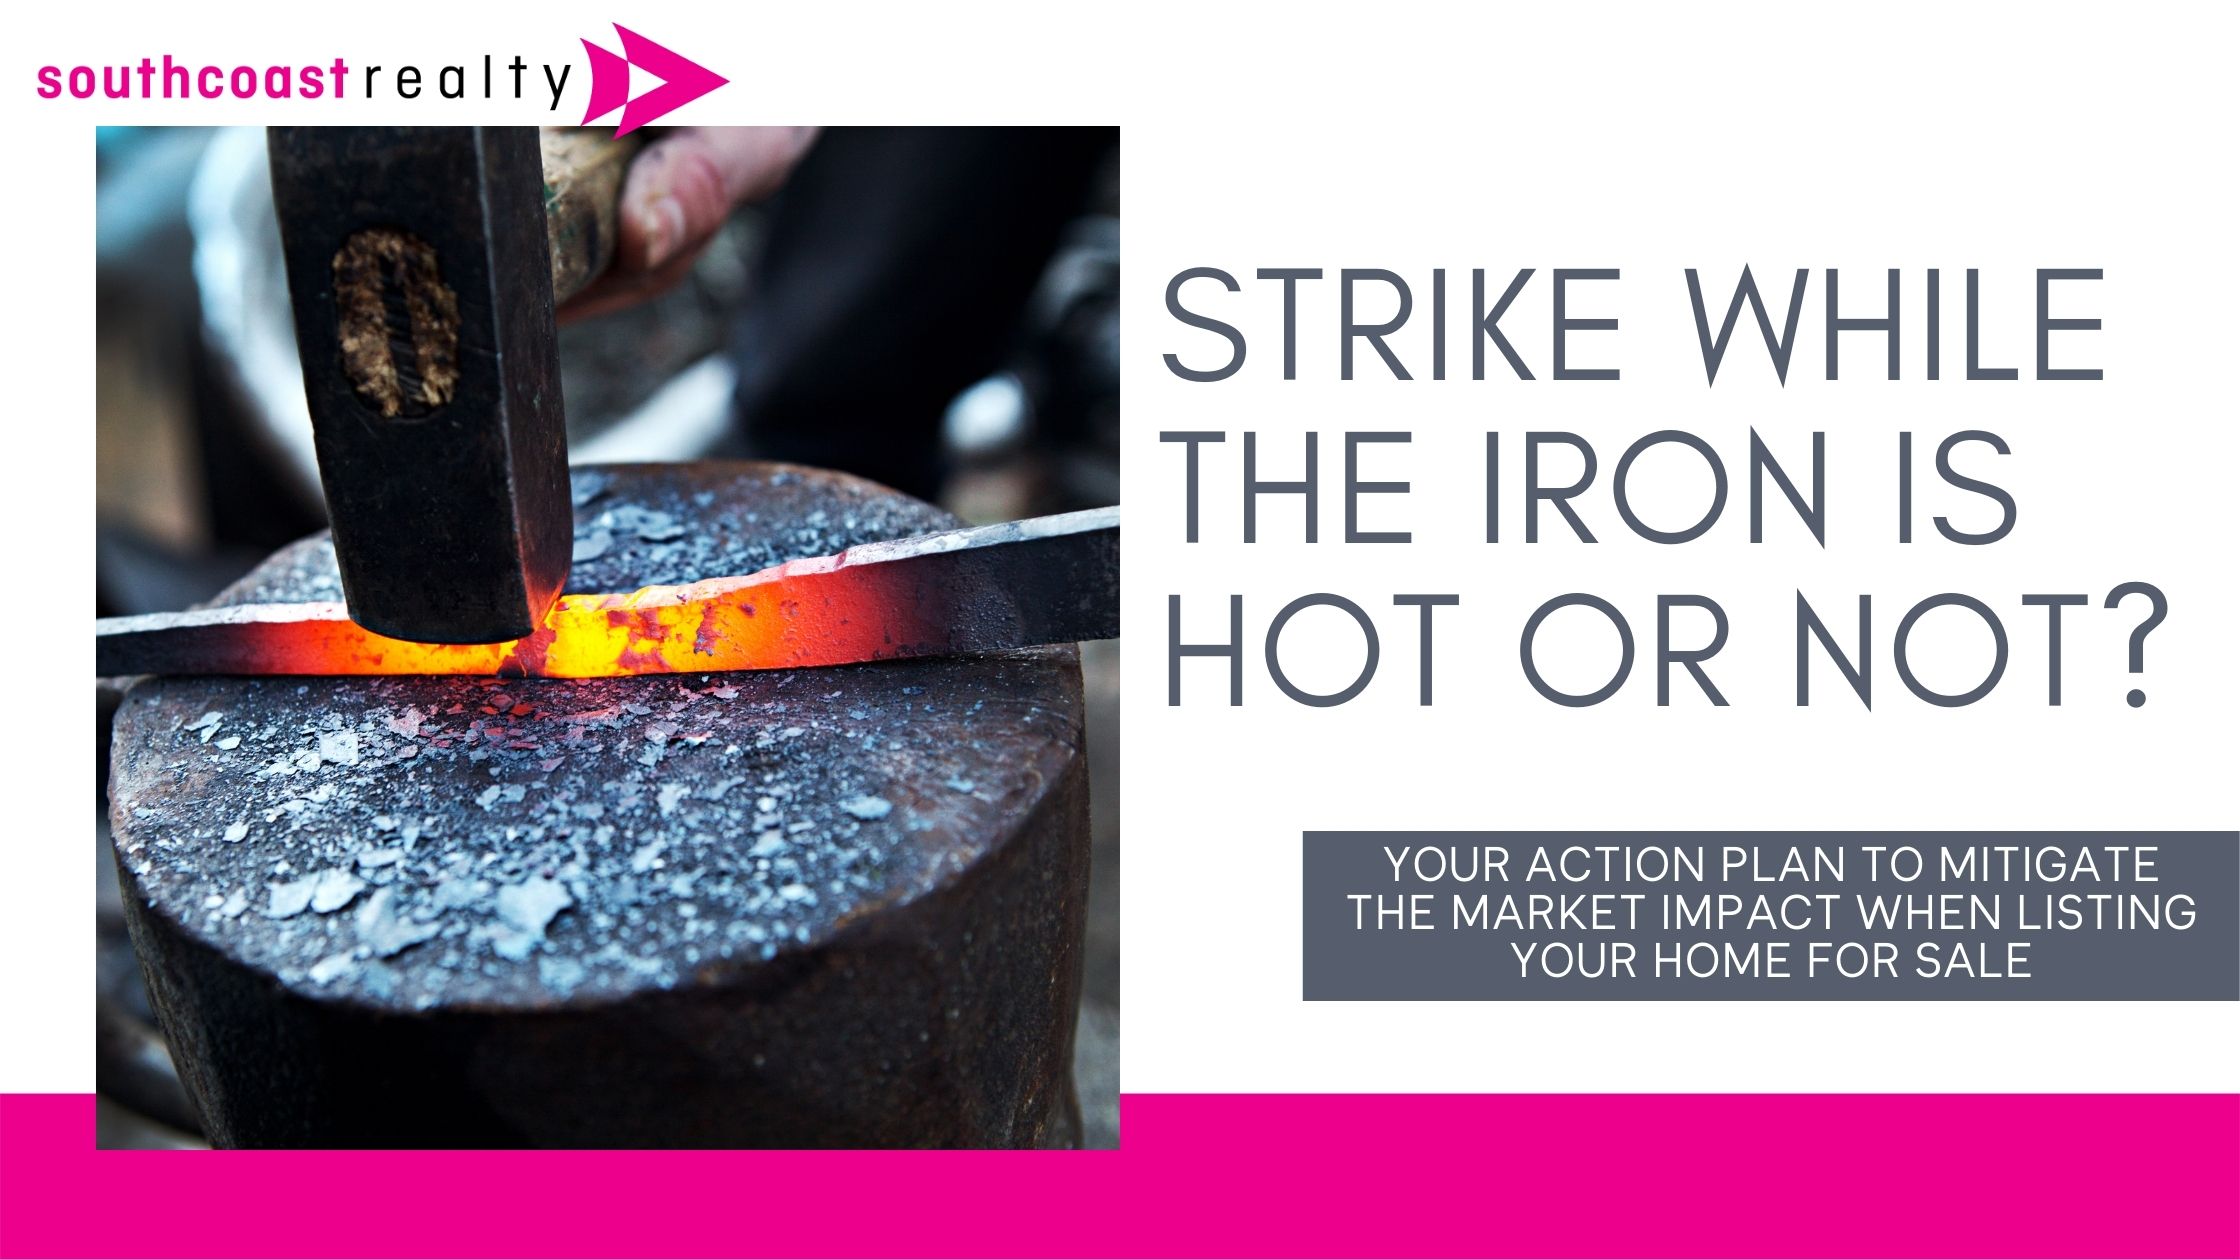 Strike while the iron is hot or not?